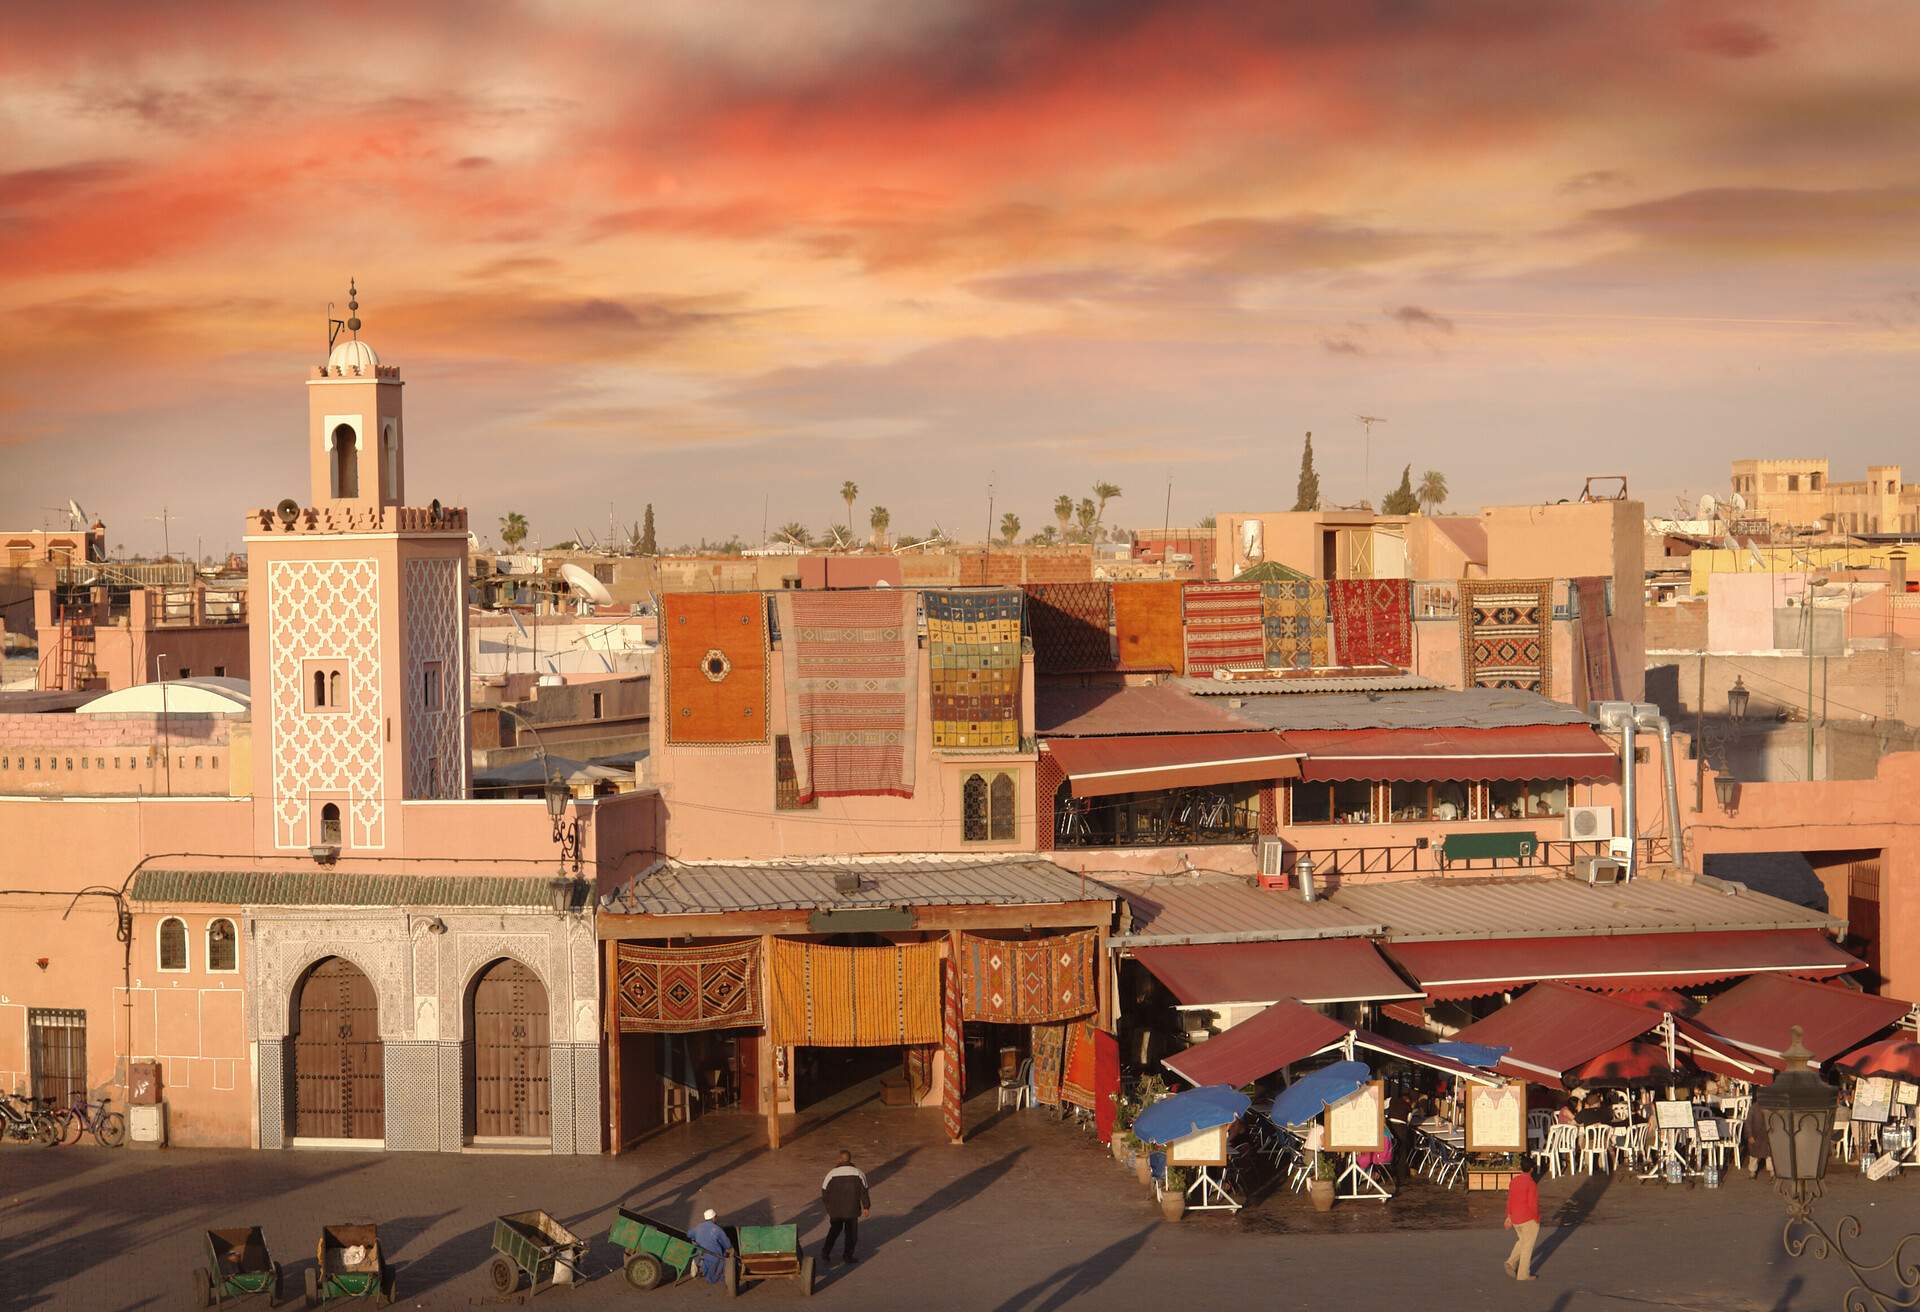 Djemaa el-Fna Square by sunset light, Marrakesh, Morocco